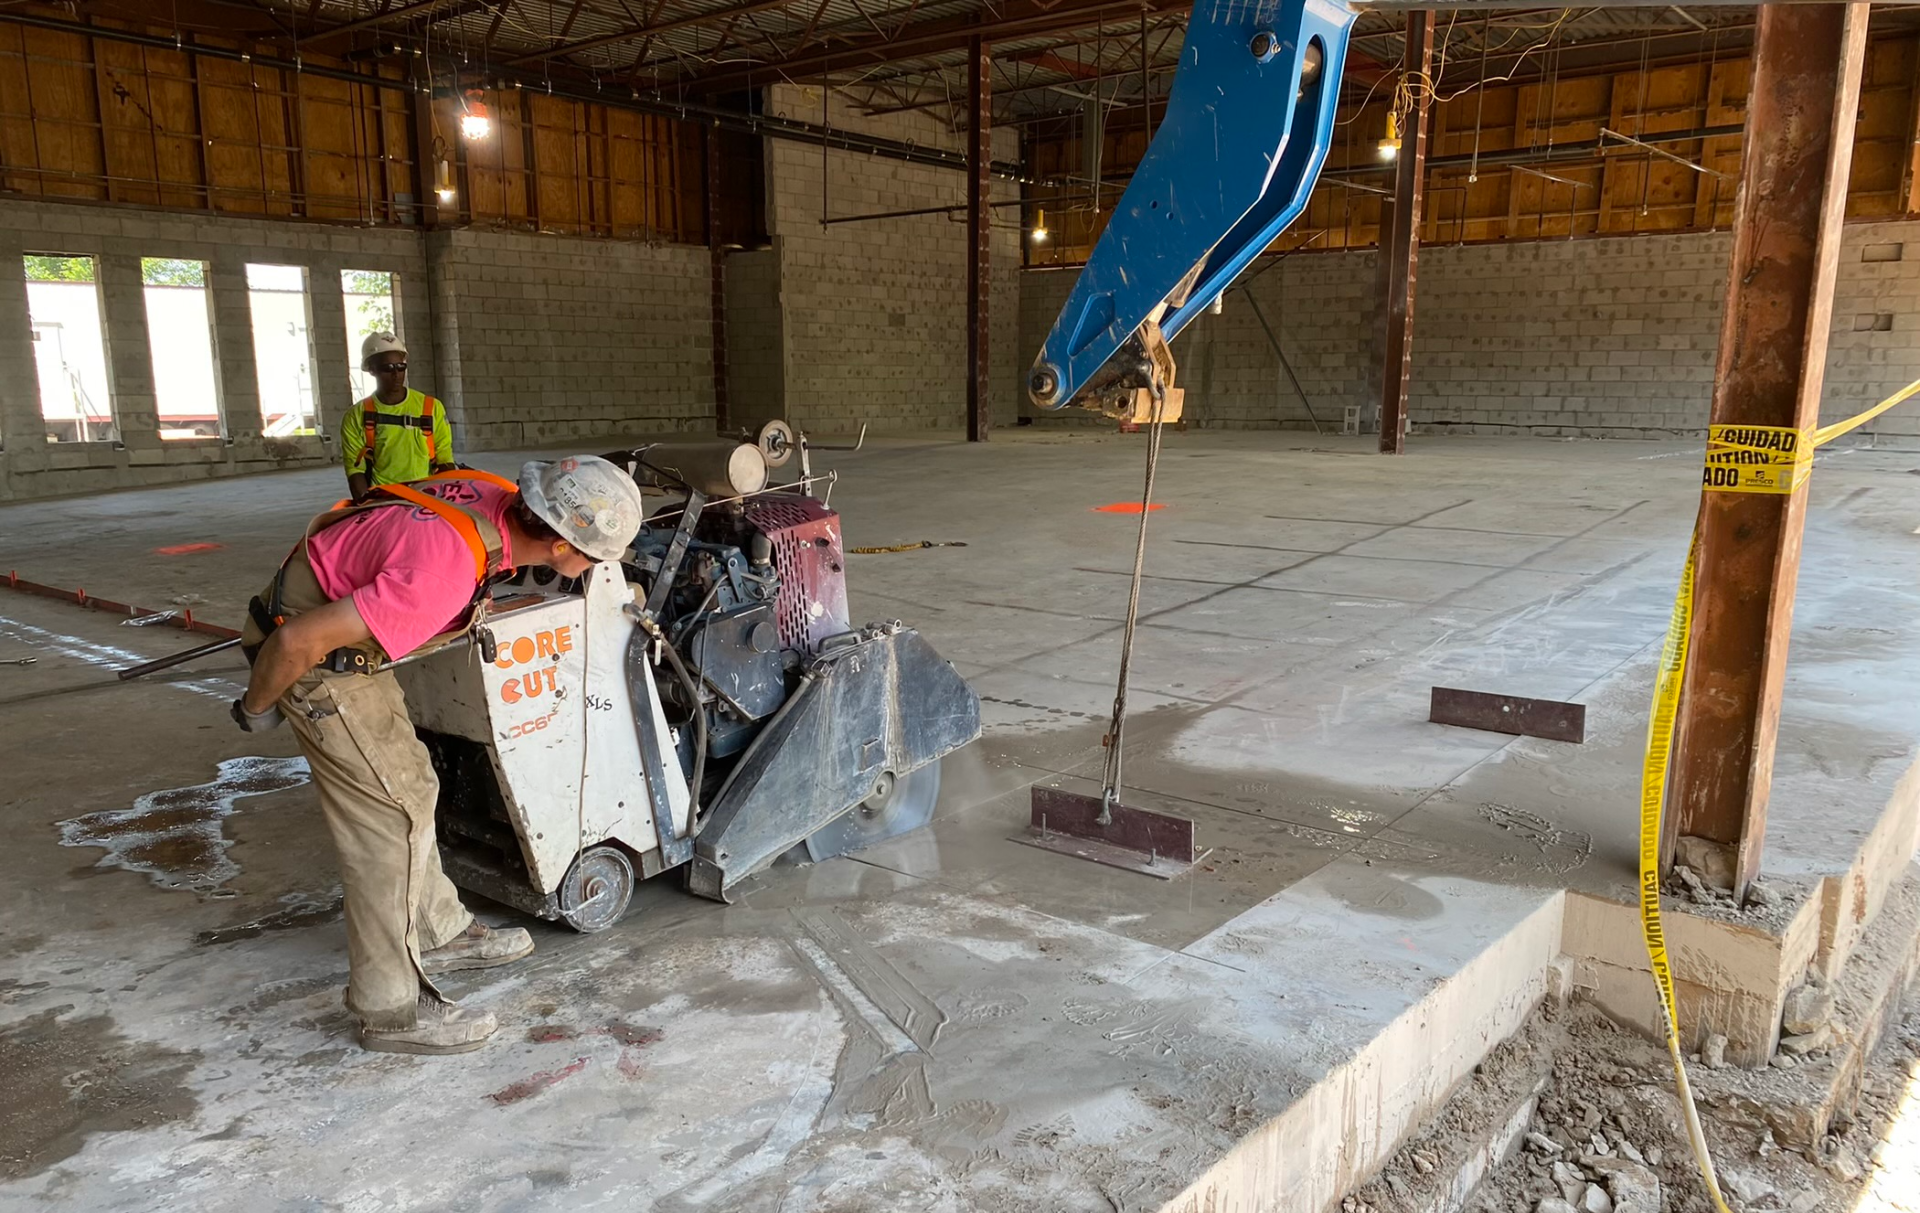 A man is using a machine to cut concrete in a large room.